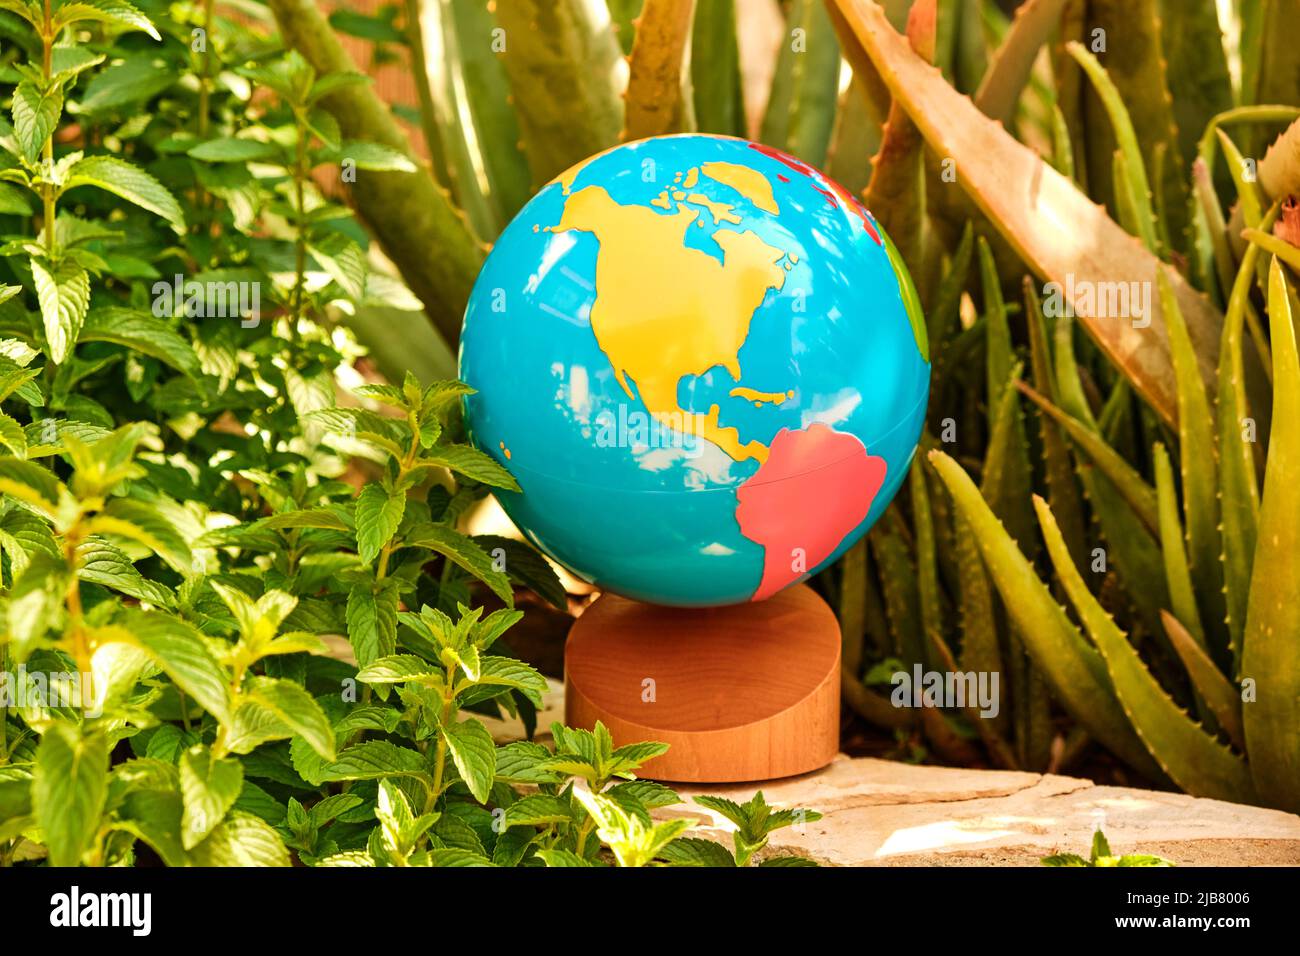 Educational colored globe of the world, among some plants in a garden. Stock Photo